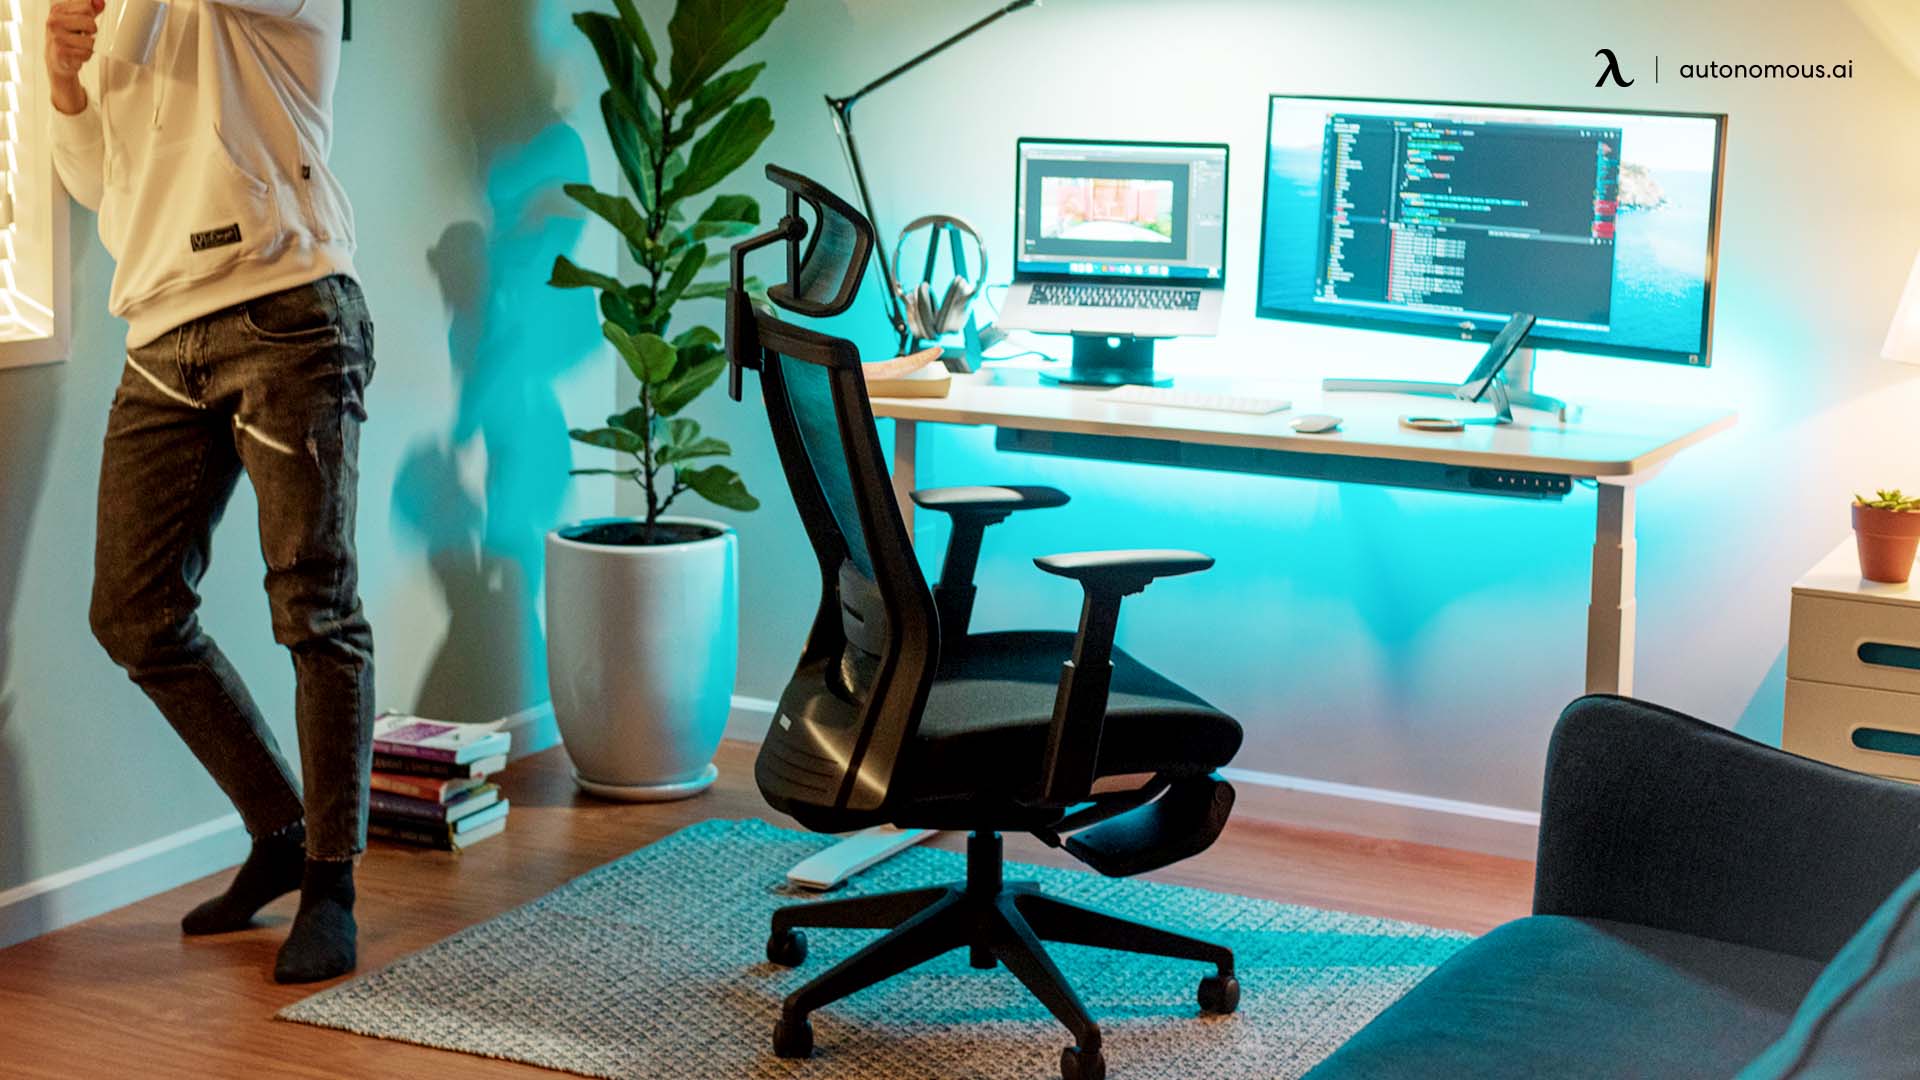 5 Useful Tips for an Ergonomic Laptop Setup in 2022